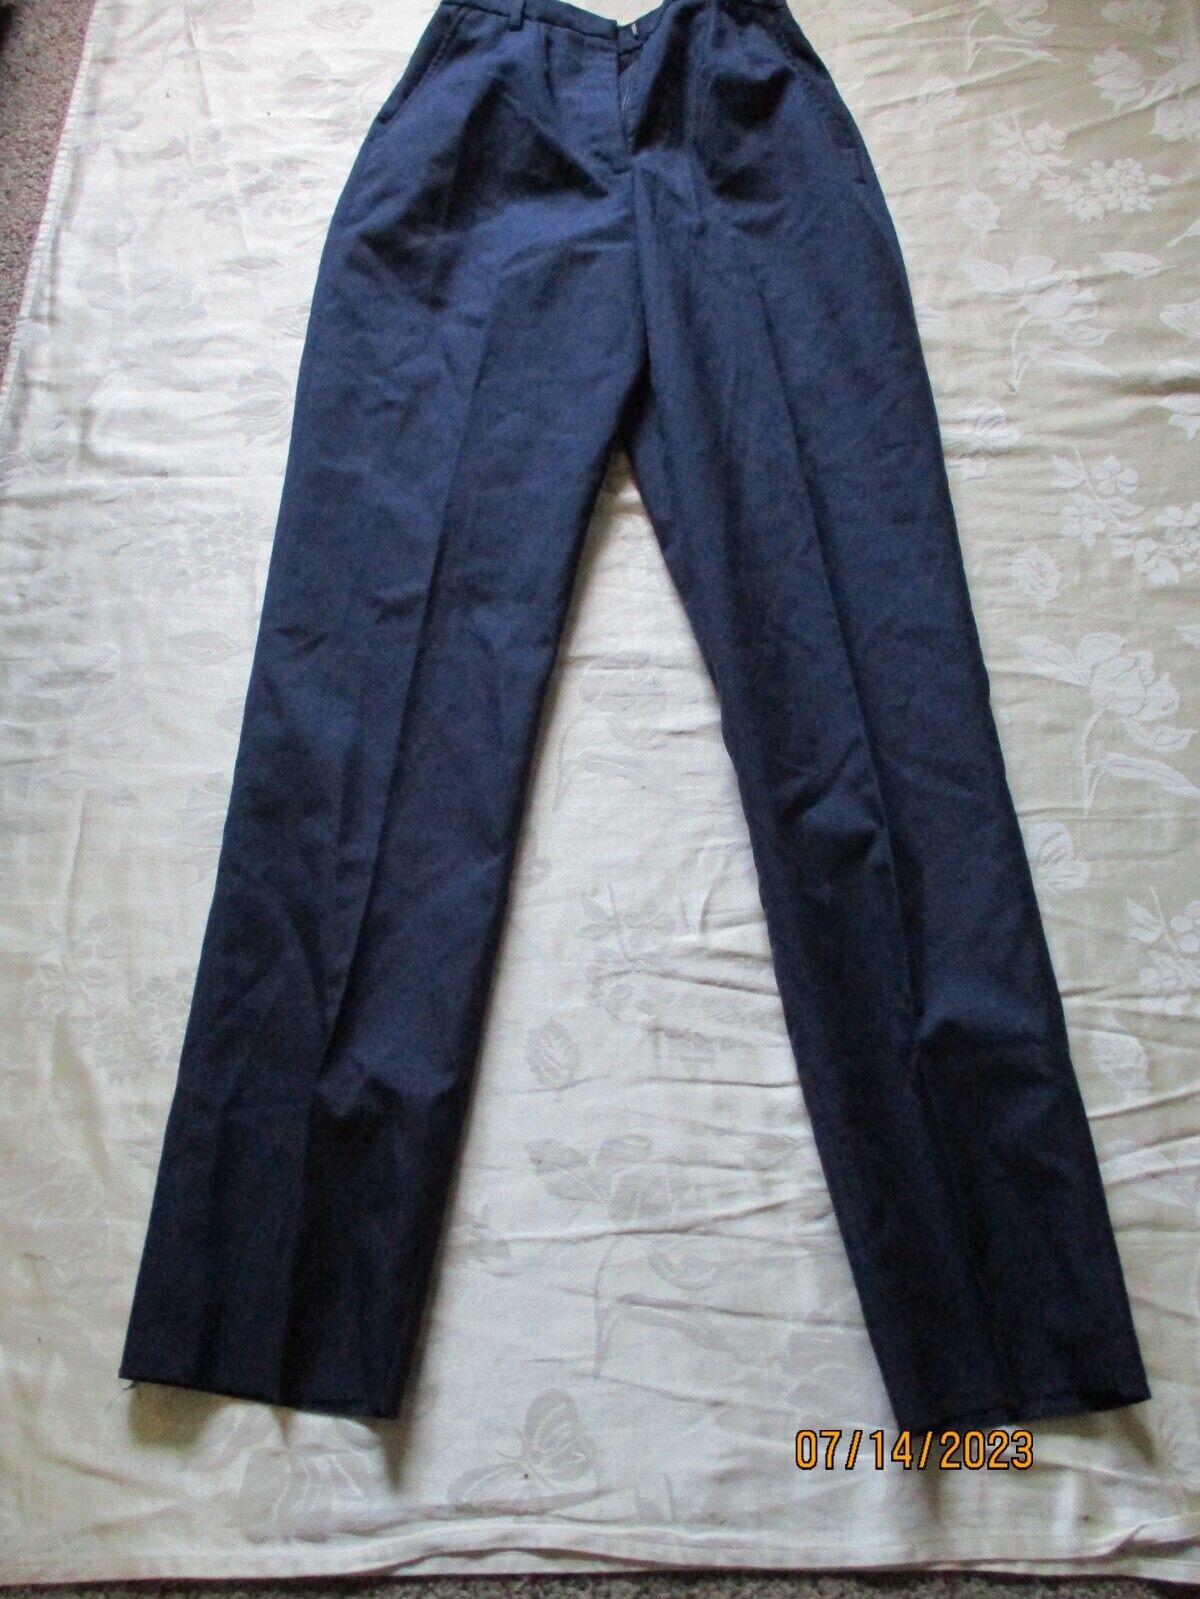 NEW/NOS DSCP Women\'s AF Military Slacks - SEE PICS IN LISTING FOR SIZE